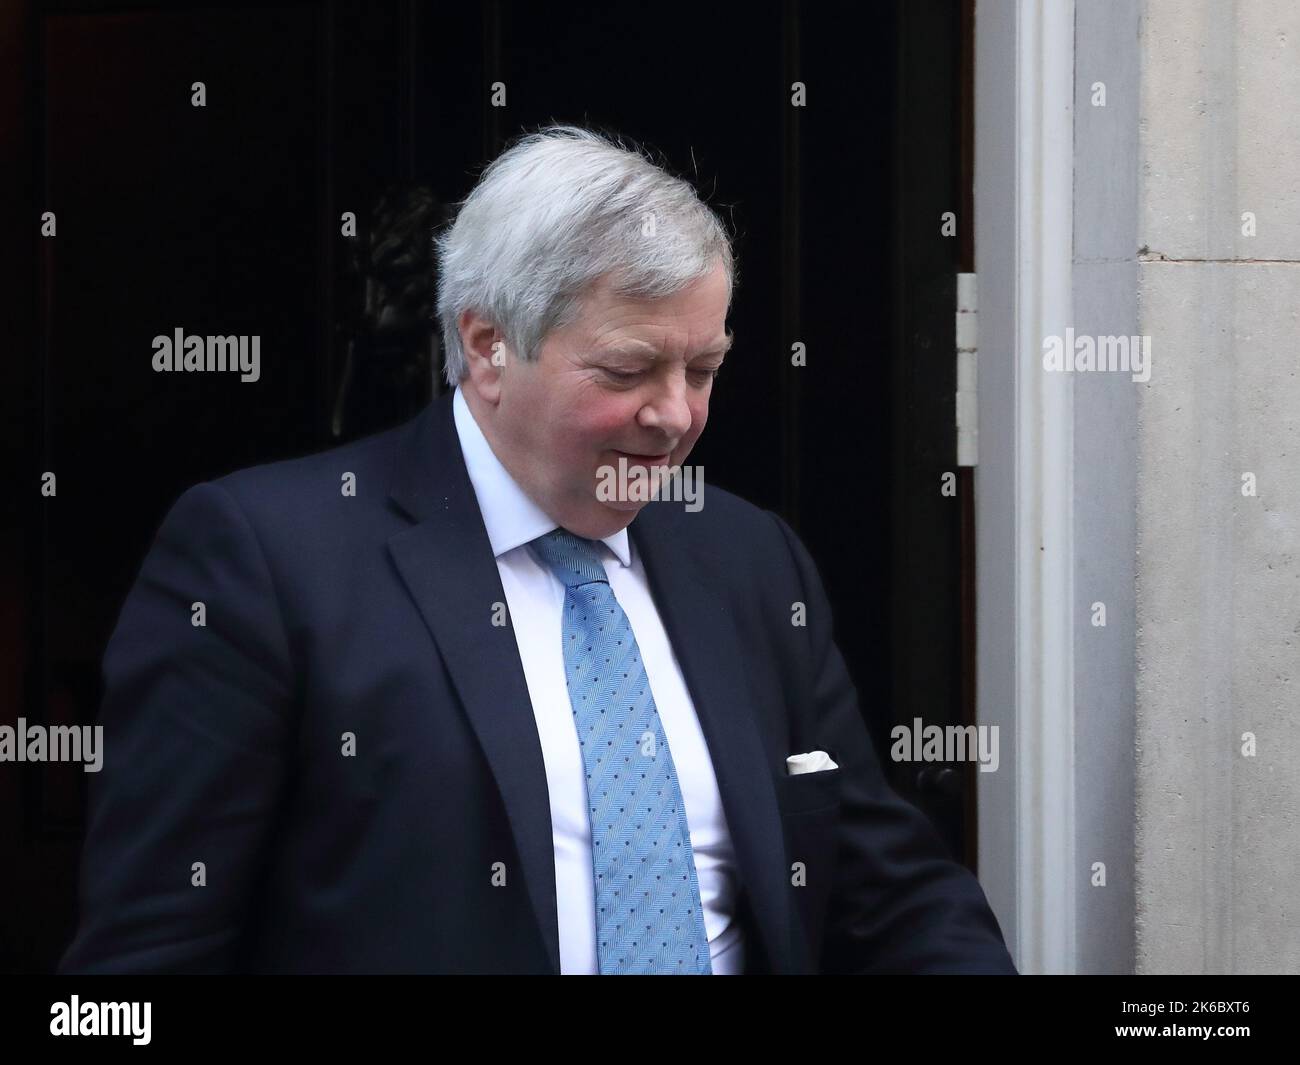 London, UK. 11th Oct 2022. Leader of the House of Lords Lord True leaves Downing Street No 10 after the weekly Cabinet Meeting. Stock Photo